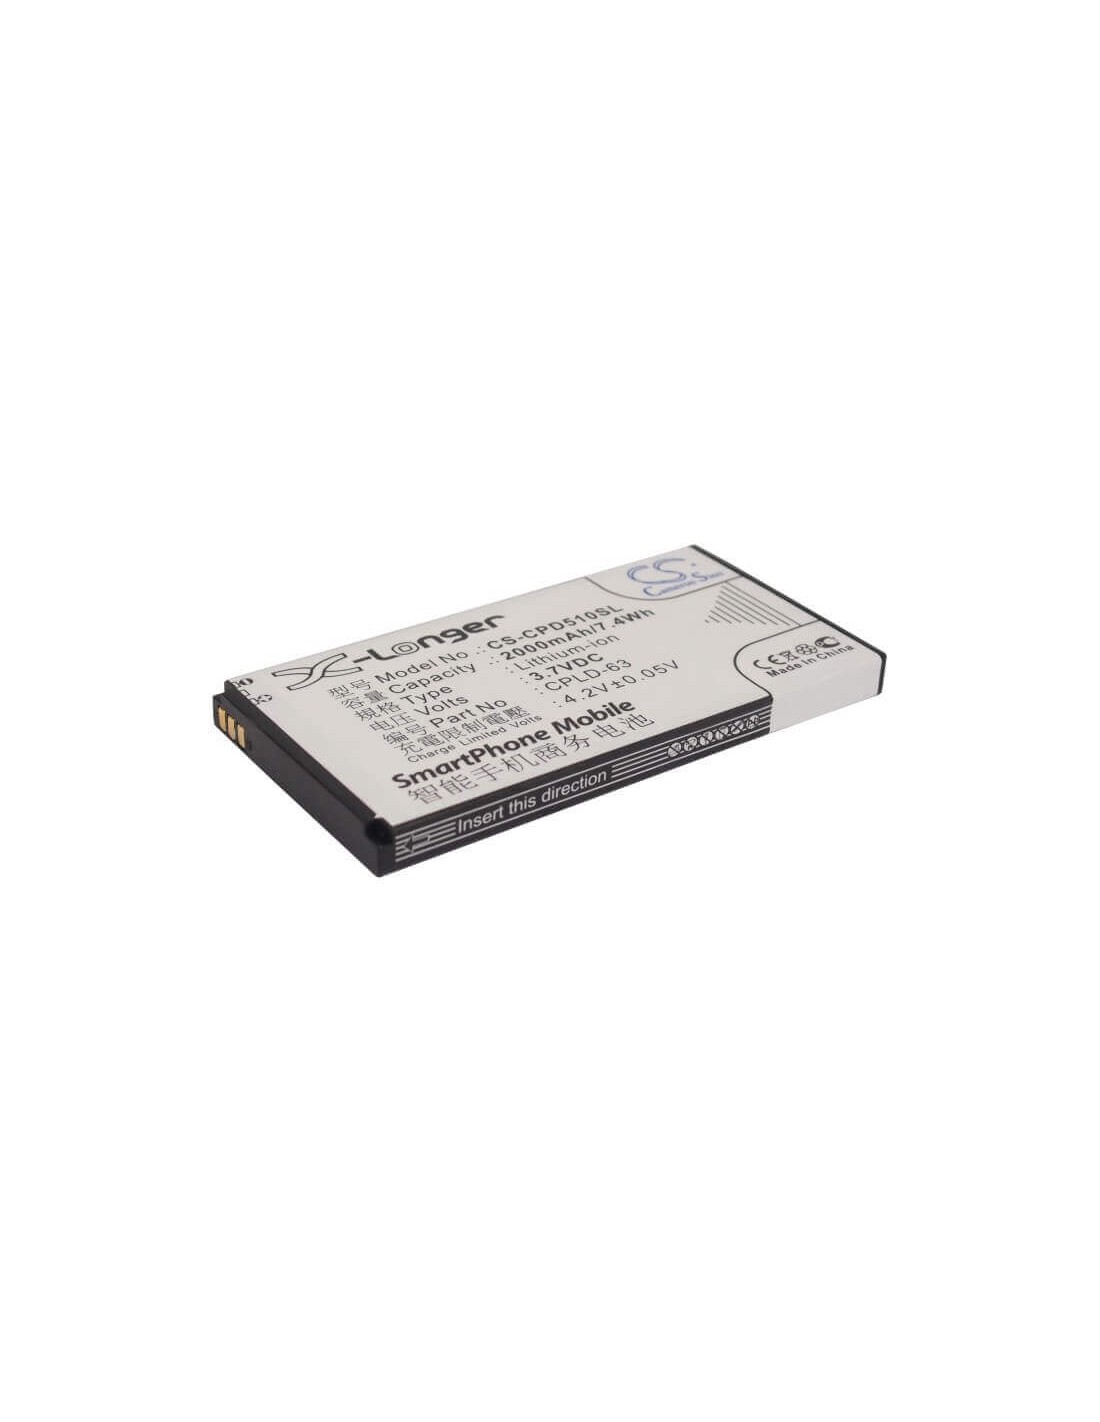 Battery for Coolpad D508, D510, 2168 3.7V, 2000mAh - 7.40Wh